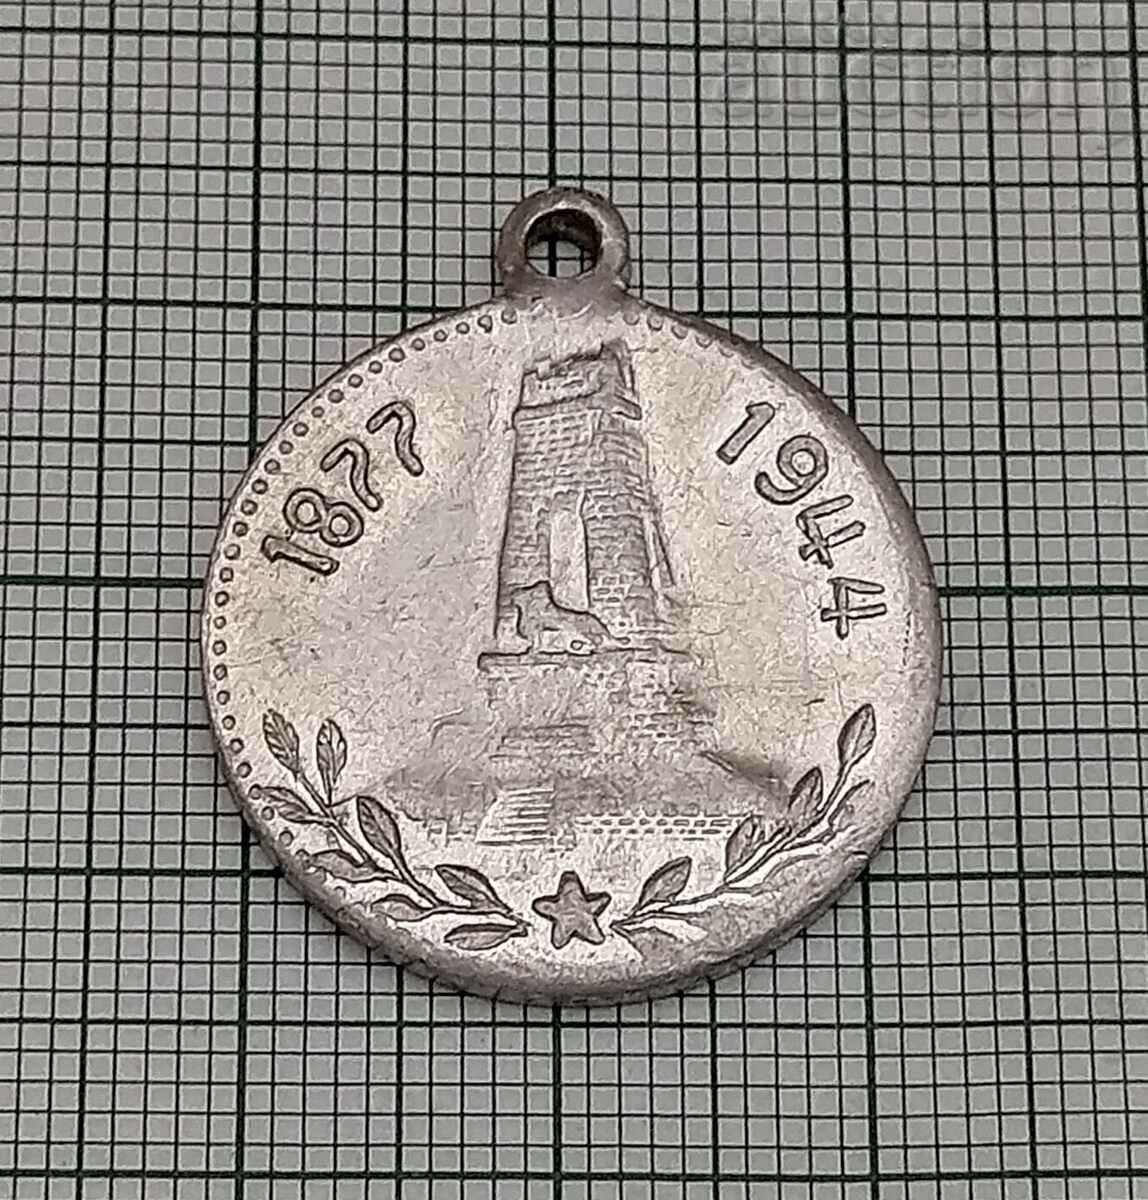 ROSE 11 AUGUST LIBERATION MEDAL